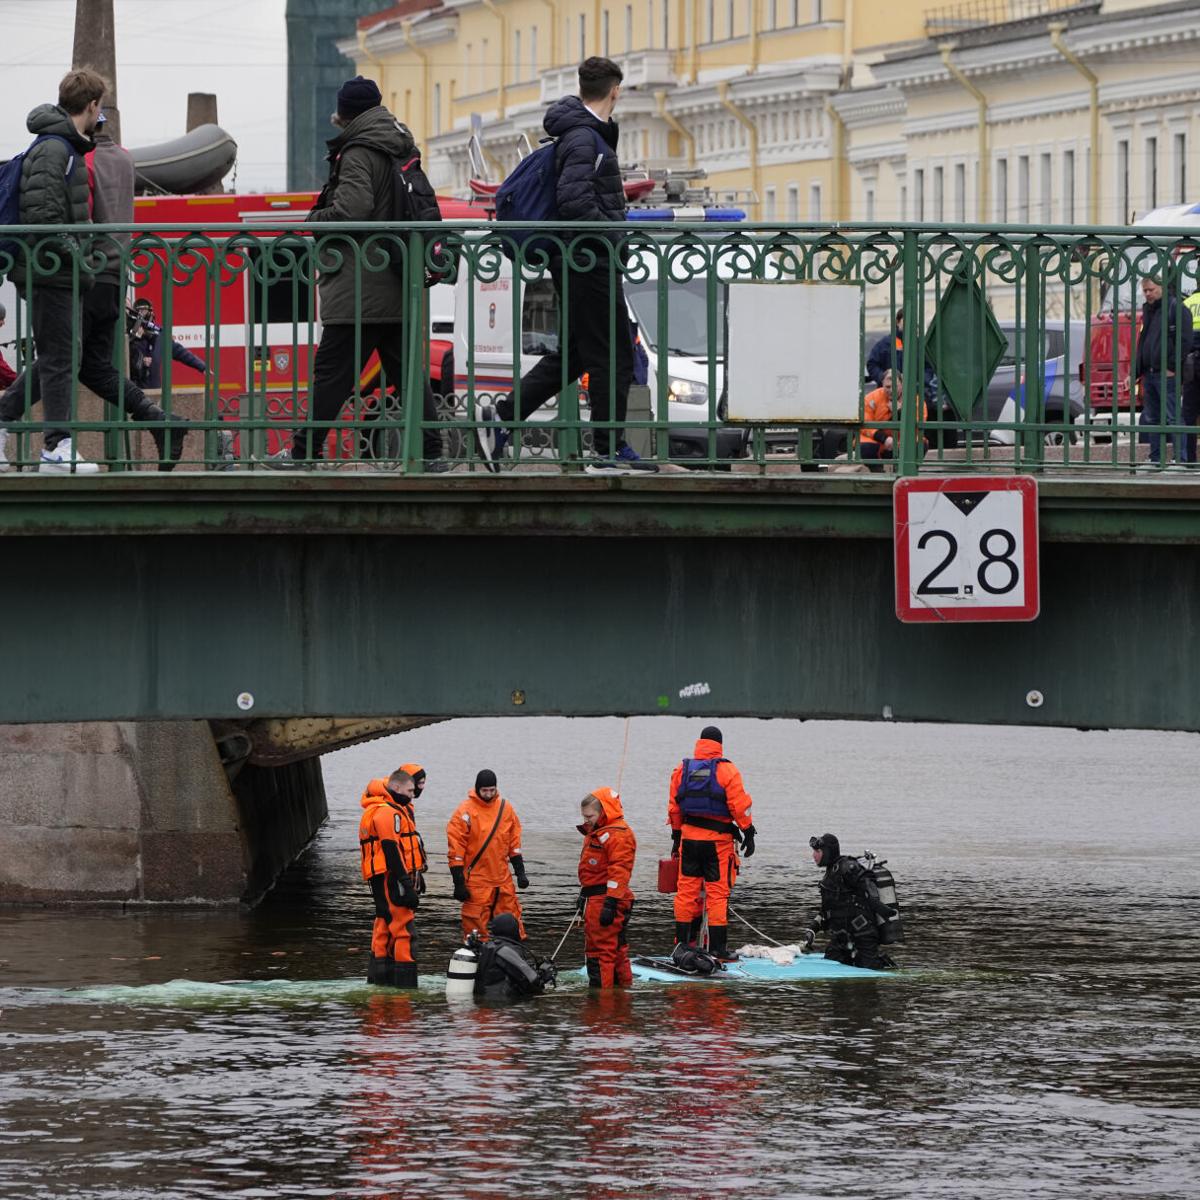 Passenger bus plunges off a bridge in the Russian city of St. Petersburg killing 7 people

A bus veered off a bridge and plunged into a river on Friday in St. Petersburg, Russia’s second-largest city, killing seven people, officials said. 

#StPetersburg
#Worldnbc